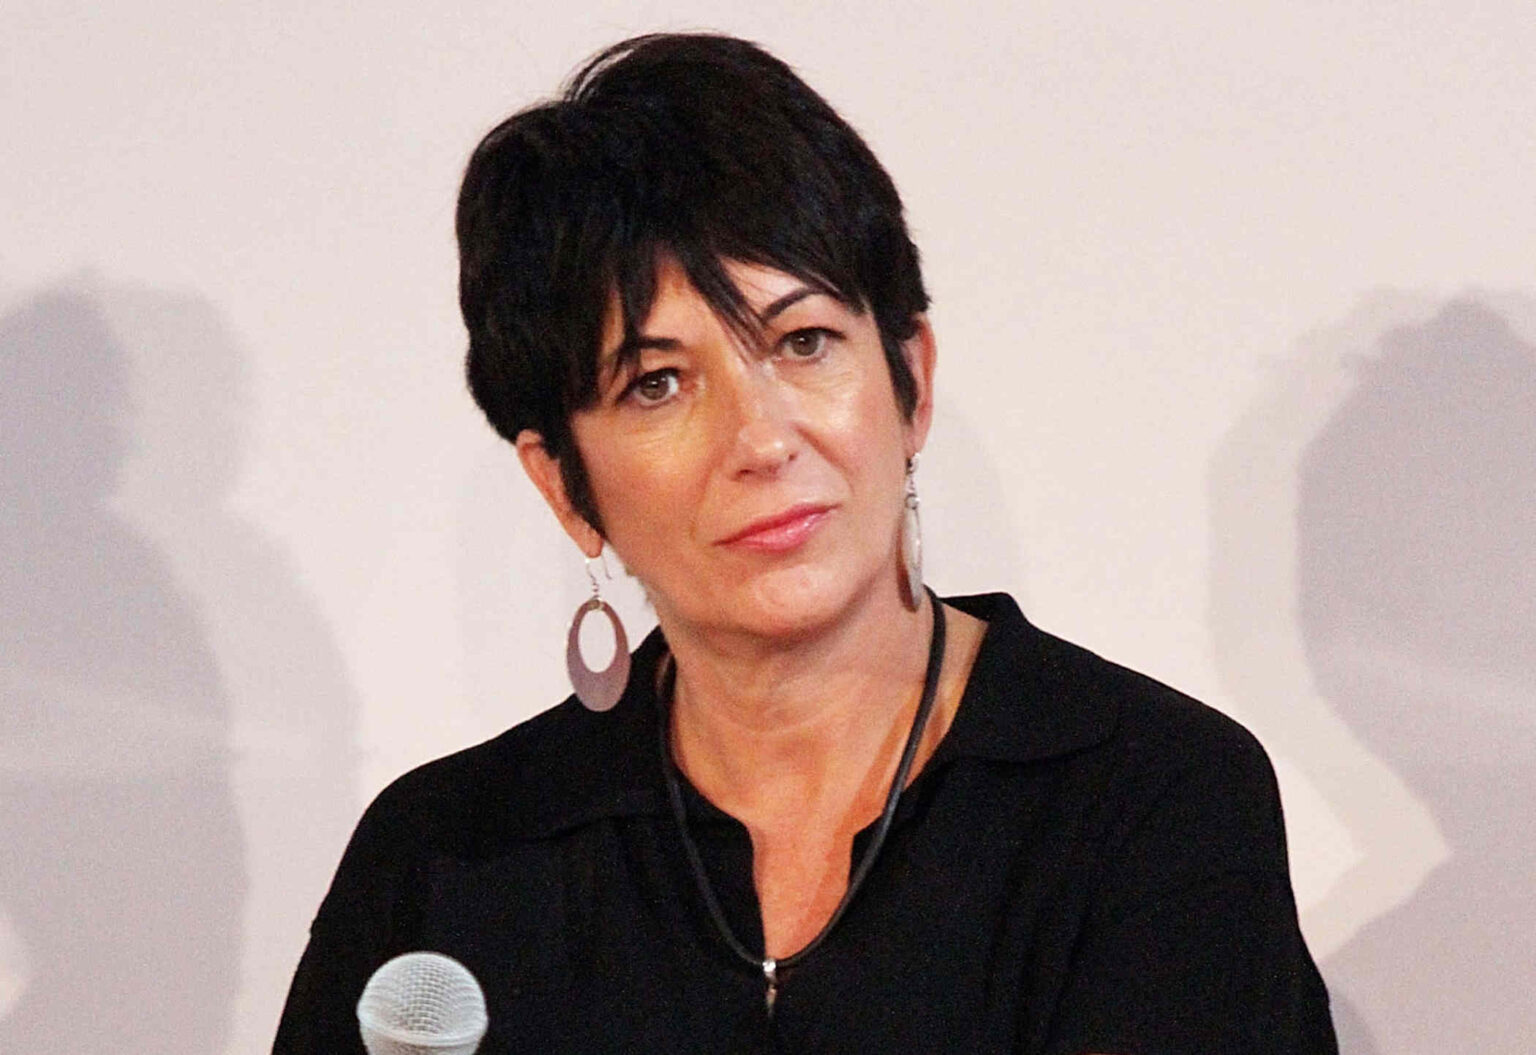 Ghislaine Maxwell has a private room in prison instead of a luxury hotel. Find out the shocking details on Maxwell's time in solitary confinement.